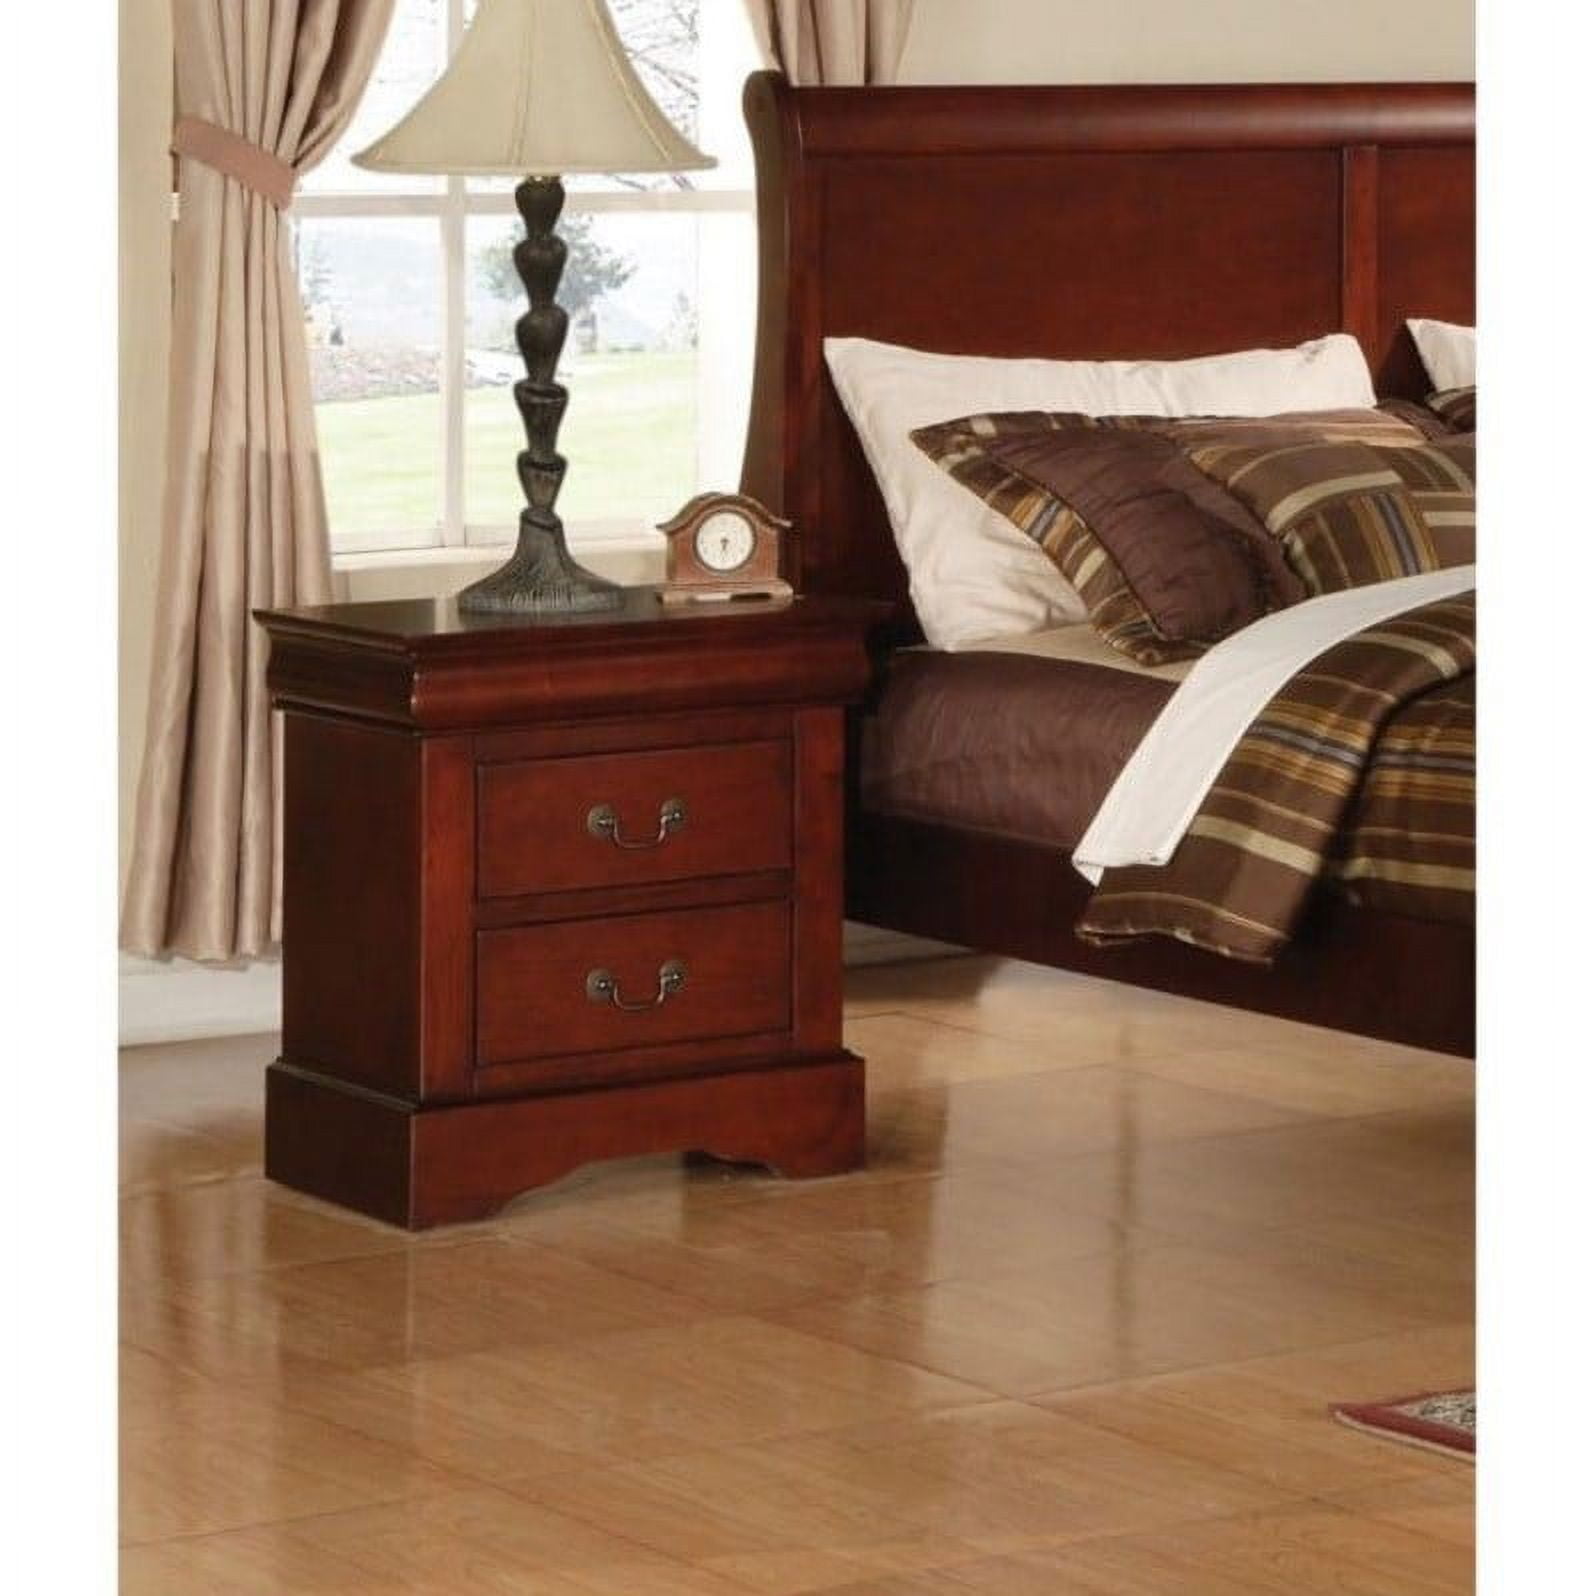 Louis Philippe III Cherry Twin Bed - Detroit Furniture Stores